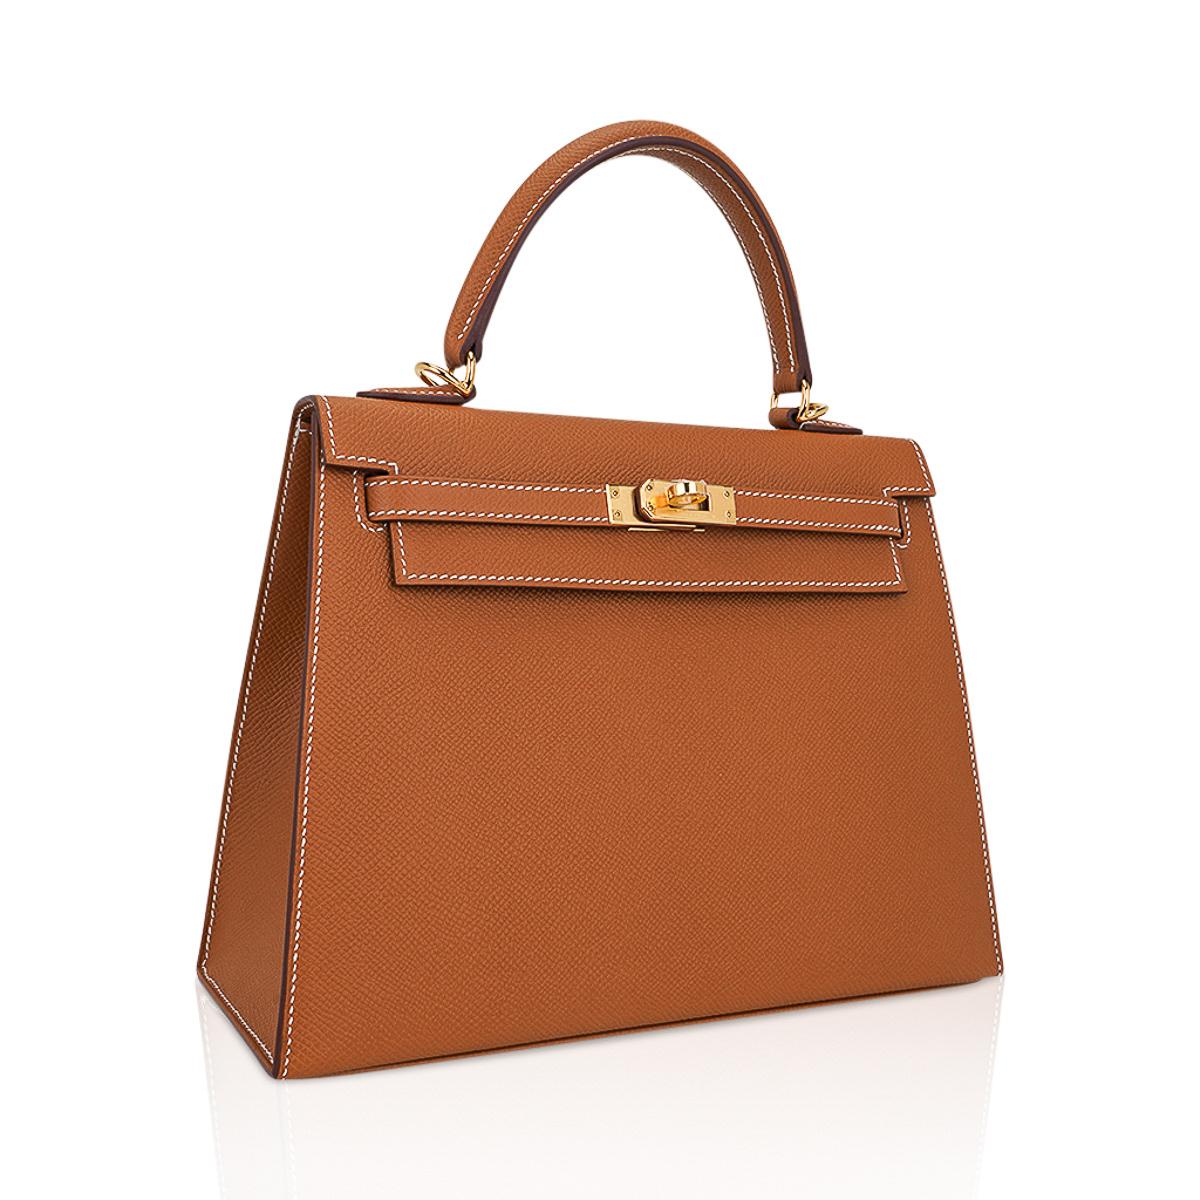 Mightychic offers an Hermes Kelly Sellier 25 bag featured in classic Gold accentuated with signature bone topstitch detail.
Refined with gold hardware and Epsom leather.
Comes with signature Hermes box, raincoat, shoulder strap, sleepers, lock, keys